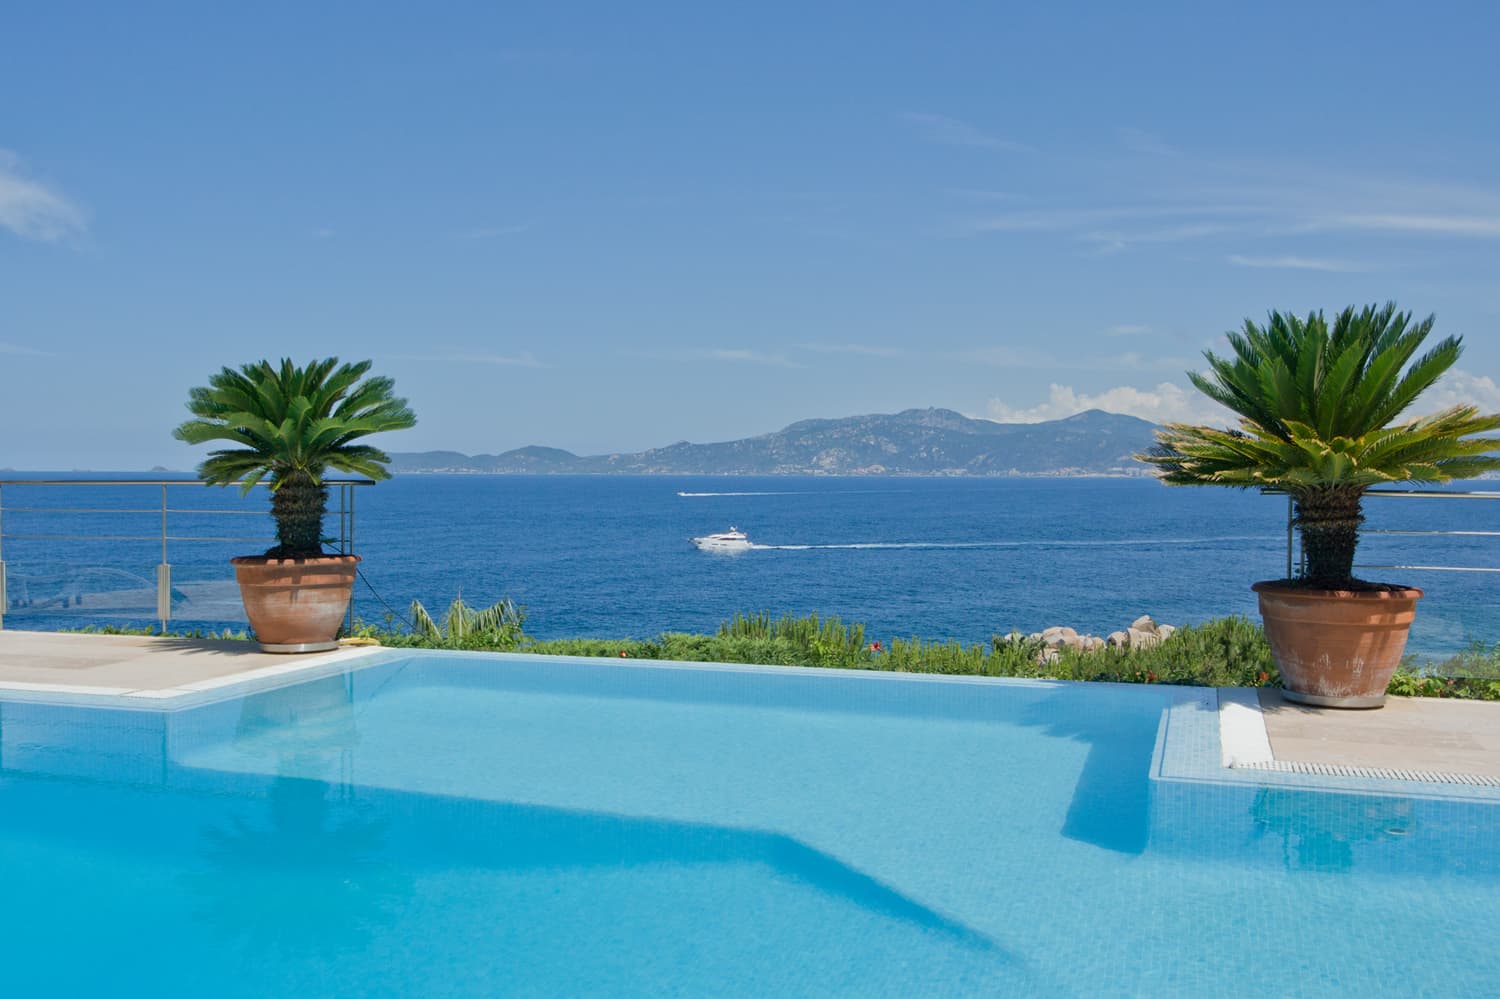 Coastal holiday villa on the island of Corsica with views of the Mediterranean and private pool | Villa Chiavari